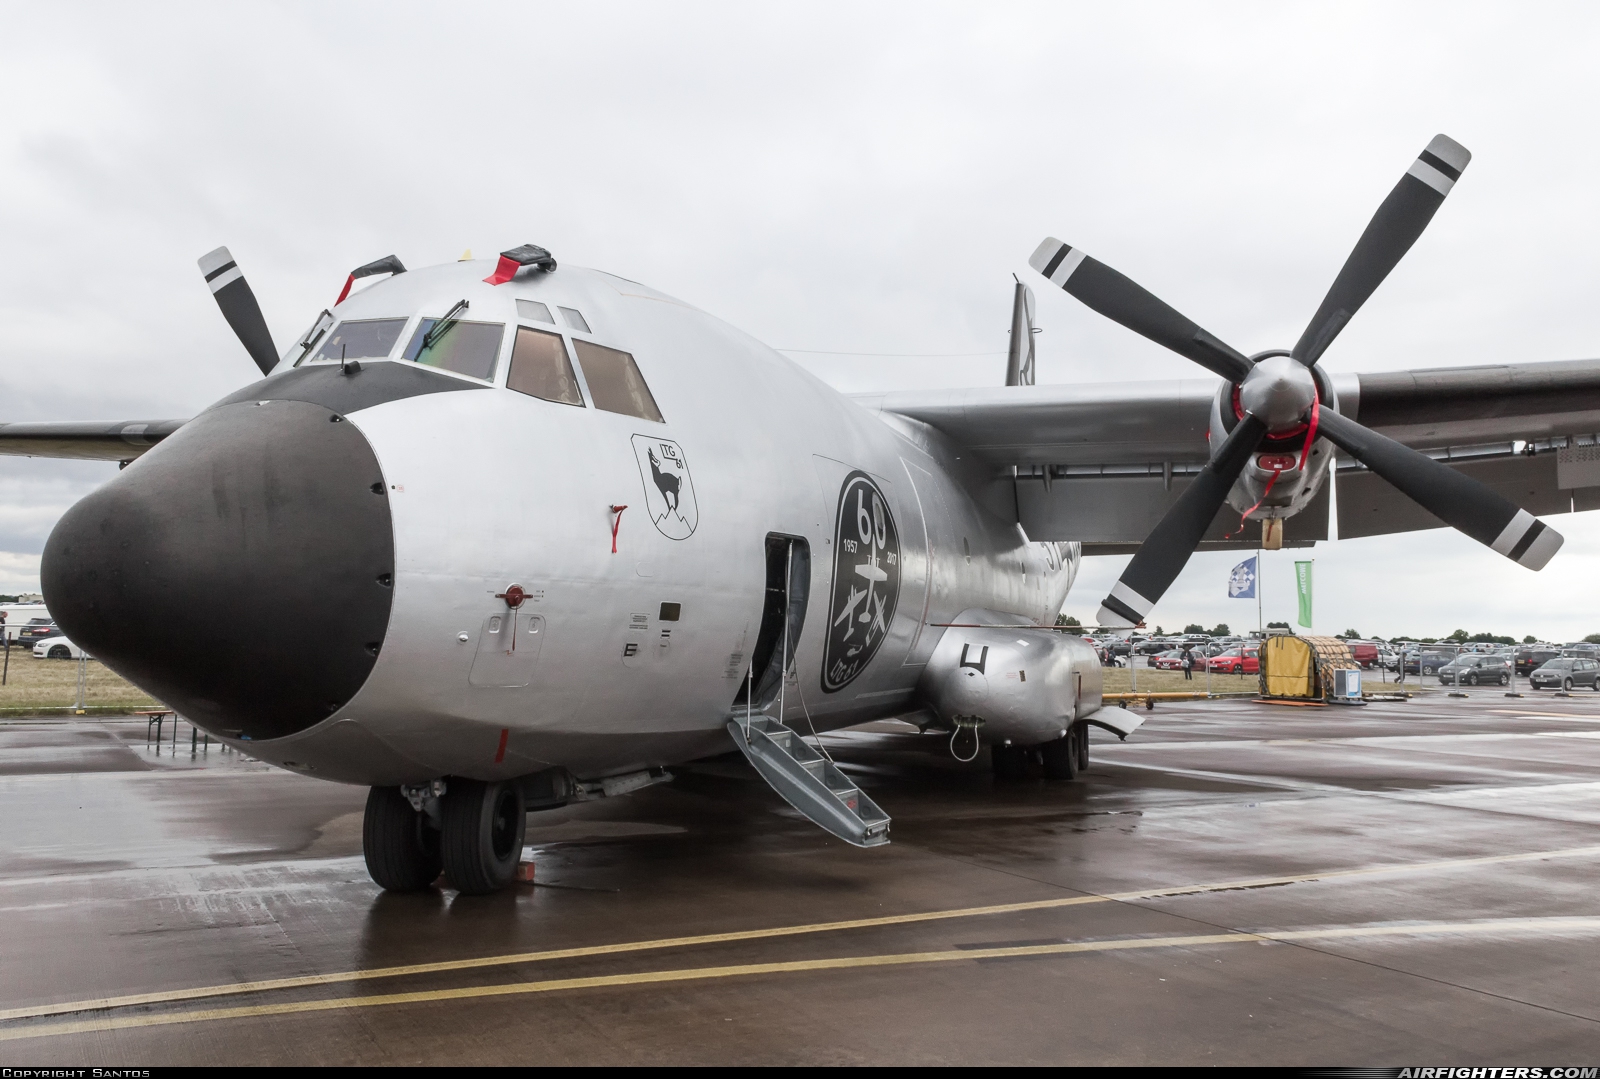 Germany - Air Force Transport Allianz C-160D 51+01 at Fairford (FFD / EGVA), UK